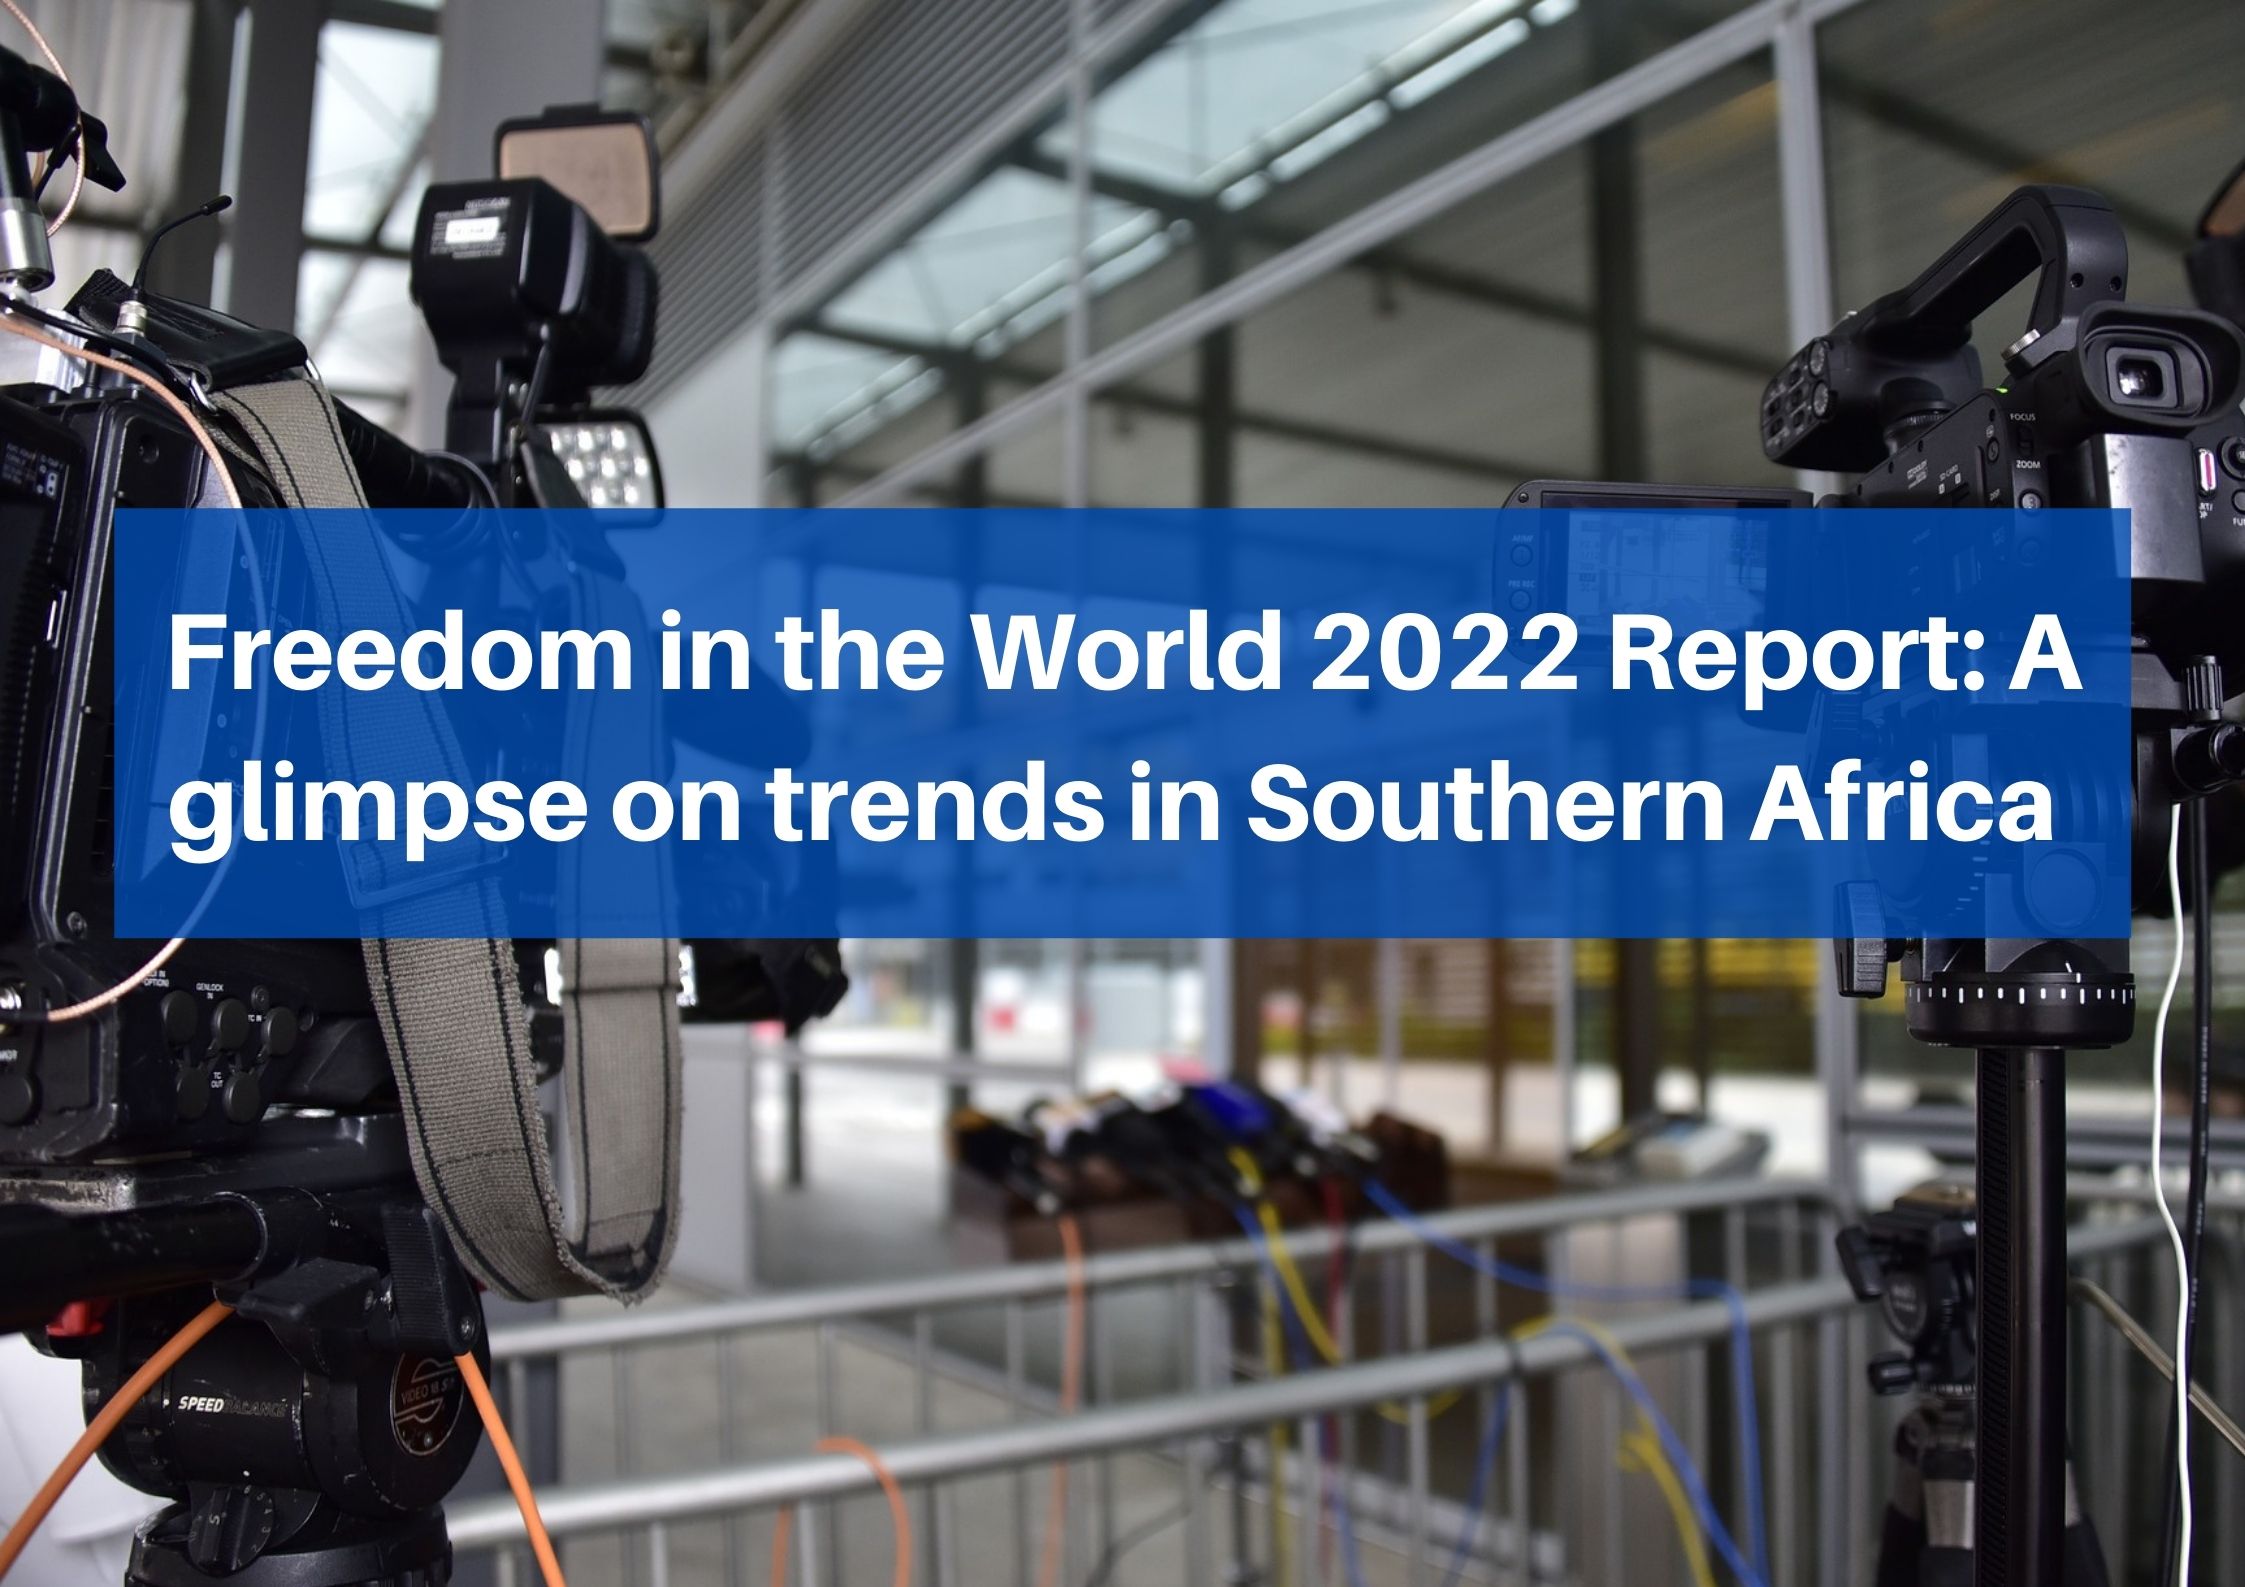 Freedom in the World 2022 Report: A glimpse on trends in Southern Africa